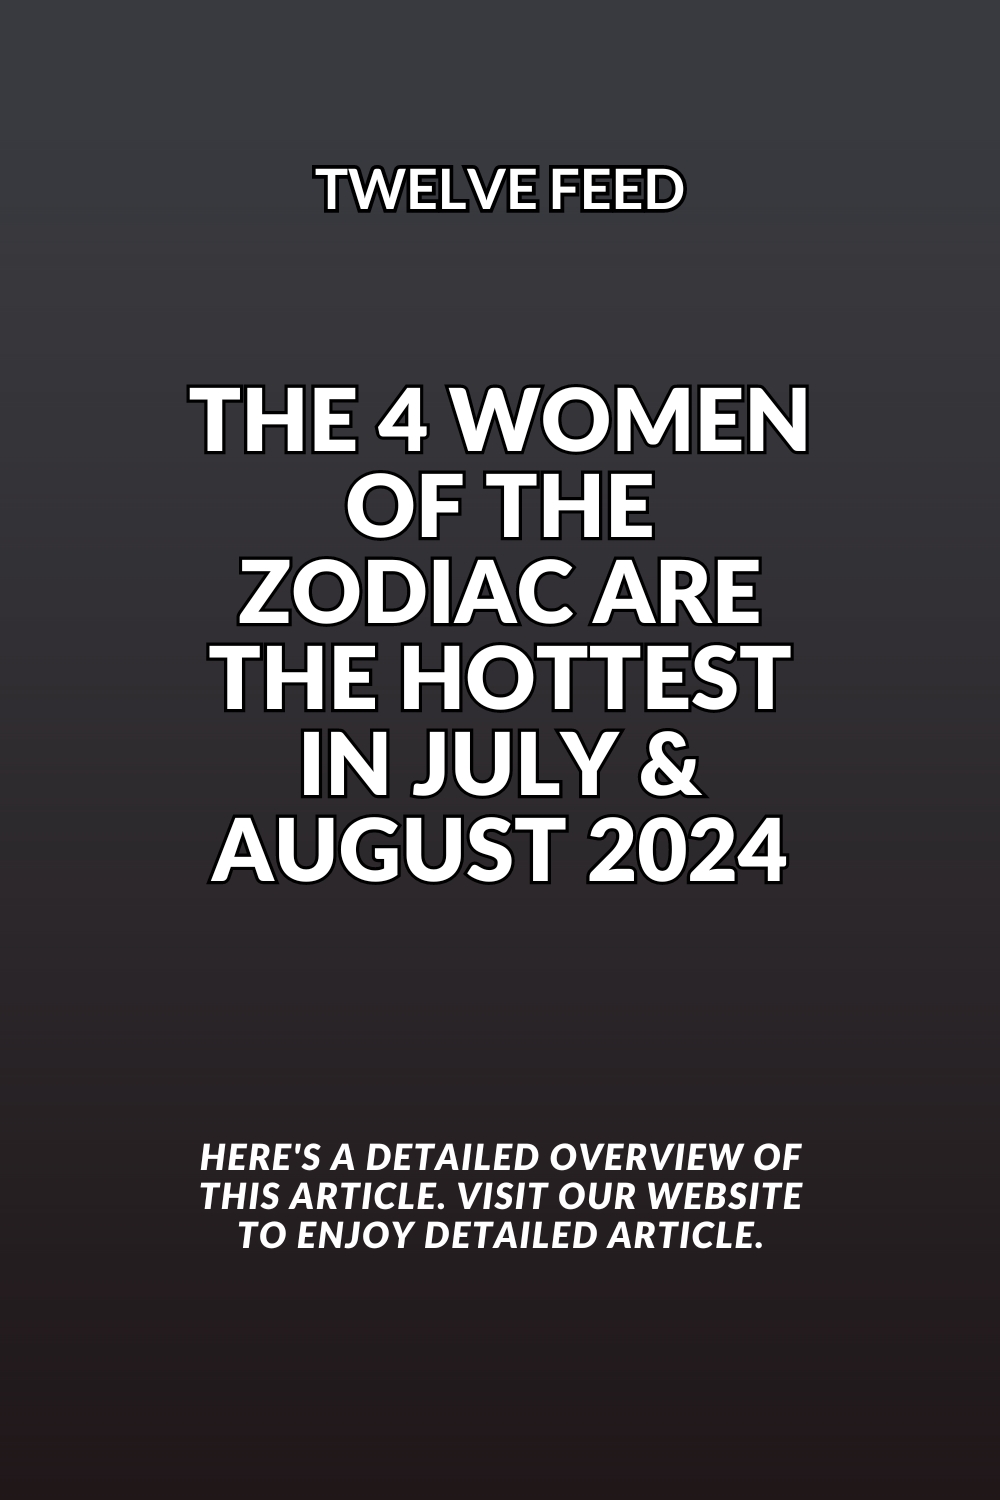 The 4 Women Of The Zodiac Are The Hottest In July & August 2024